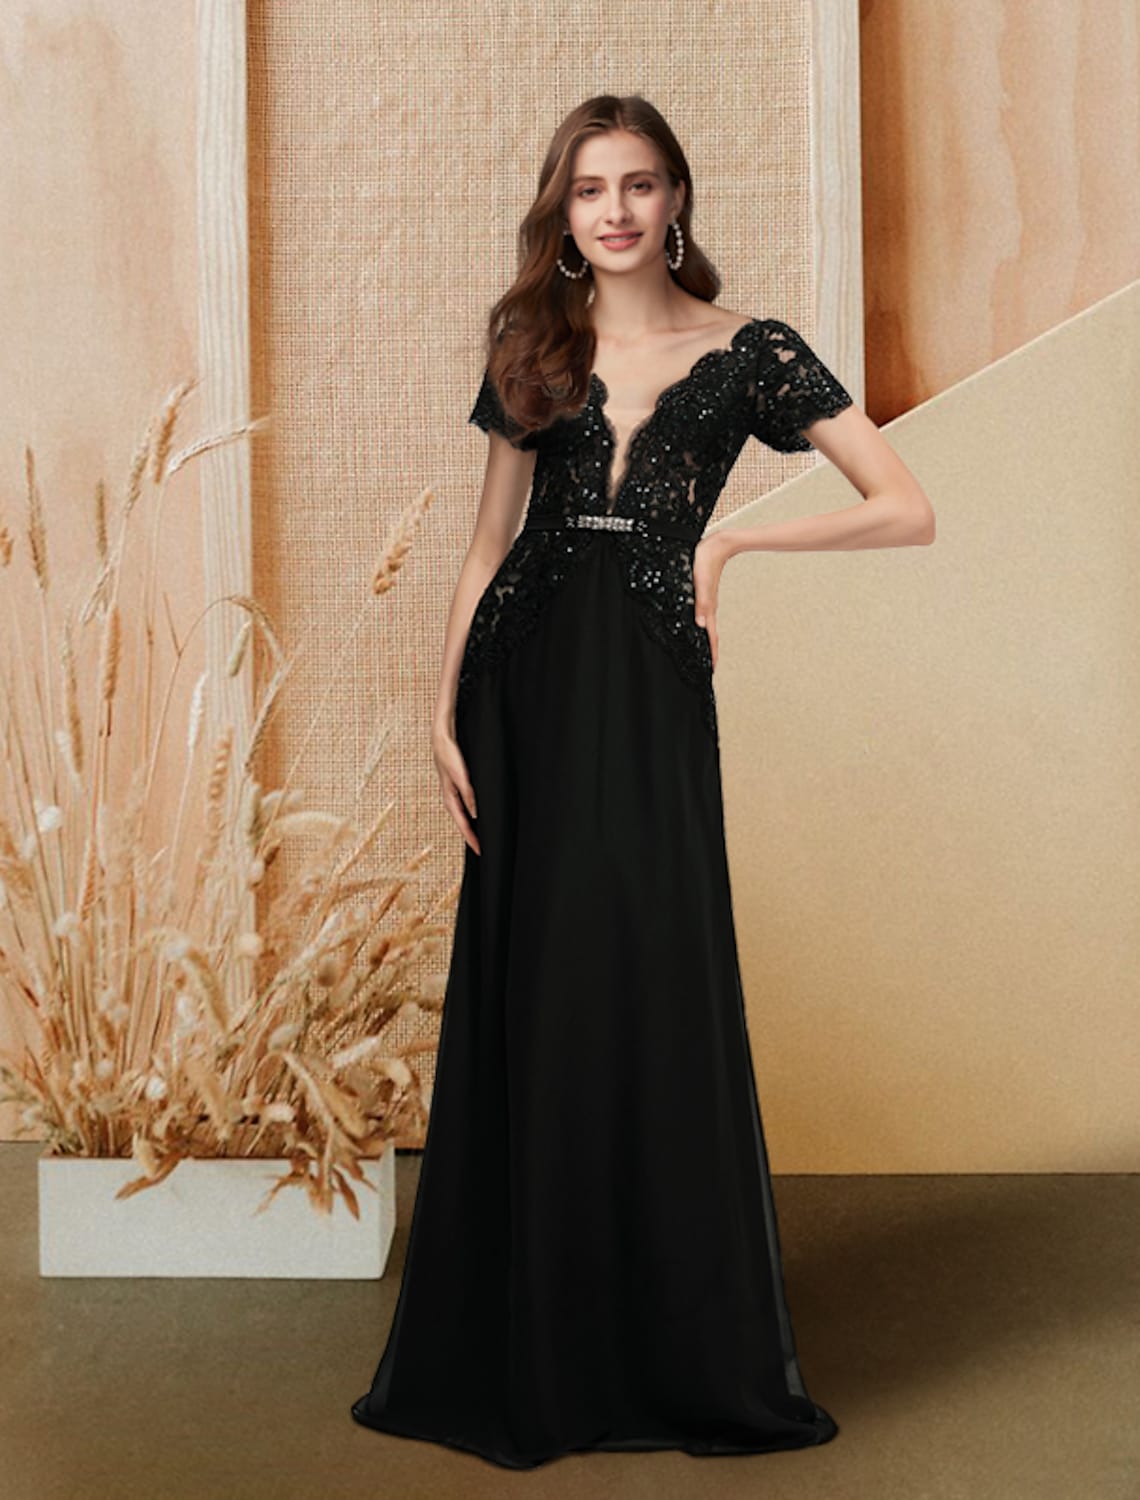 A-Line Evening Gown Dress Engagement Floor Length Short Sleeve V Neck Chiffon with Sequin Lace